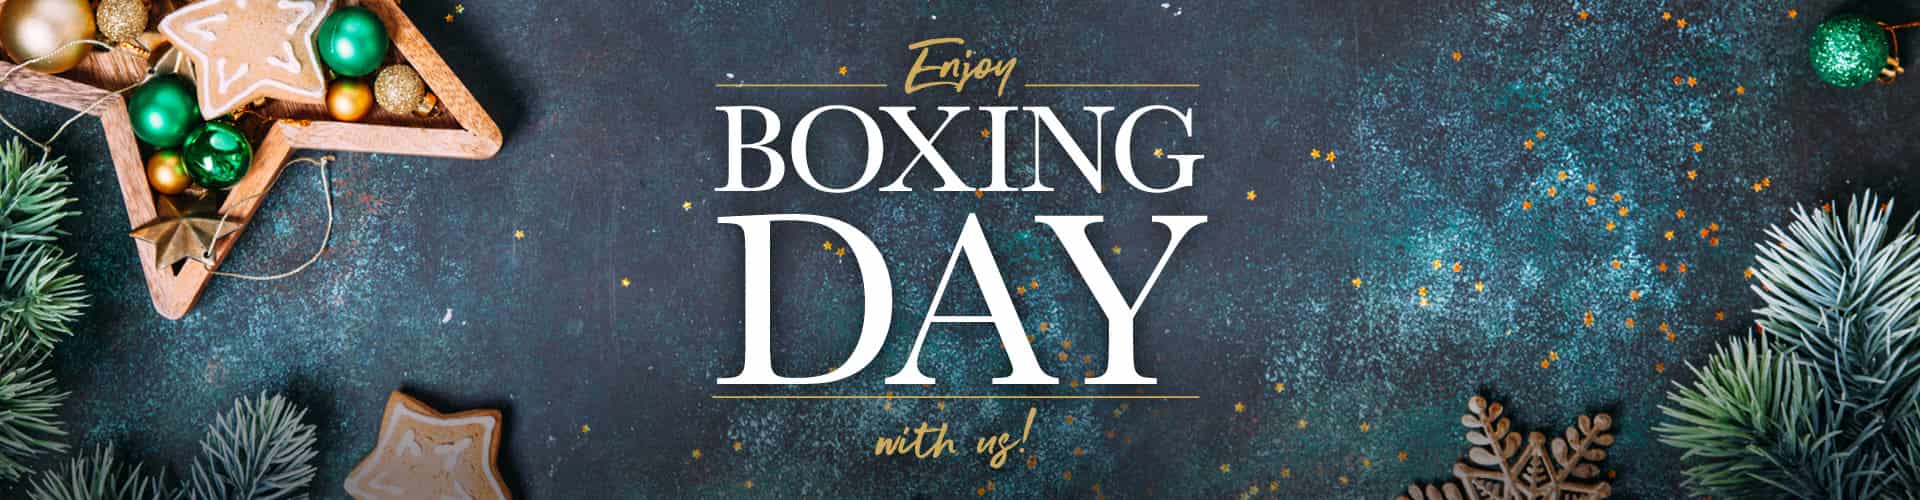 Enjoy Boxing Day with us at Swan Inn